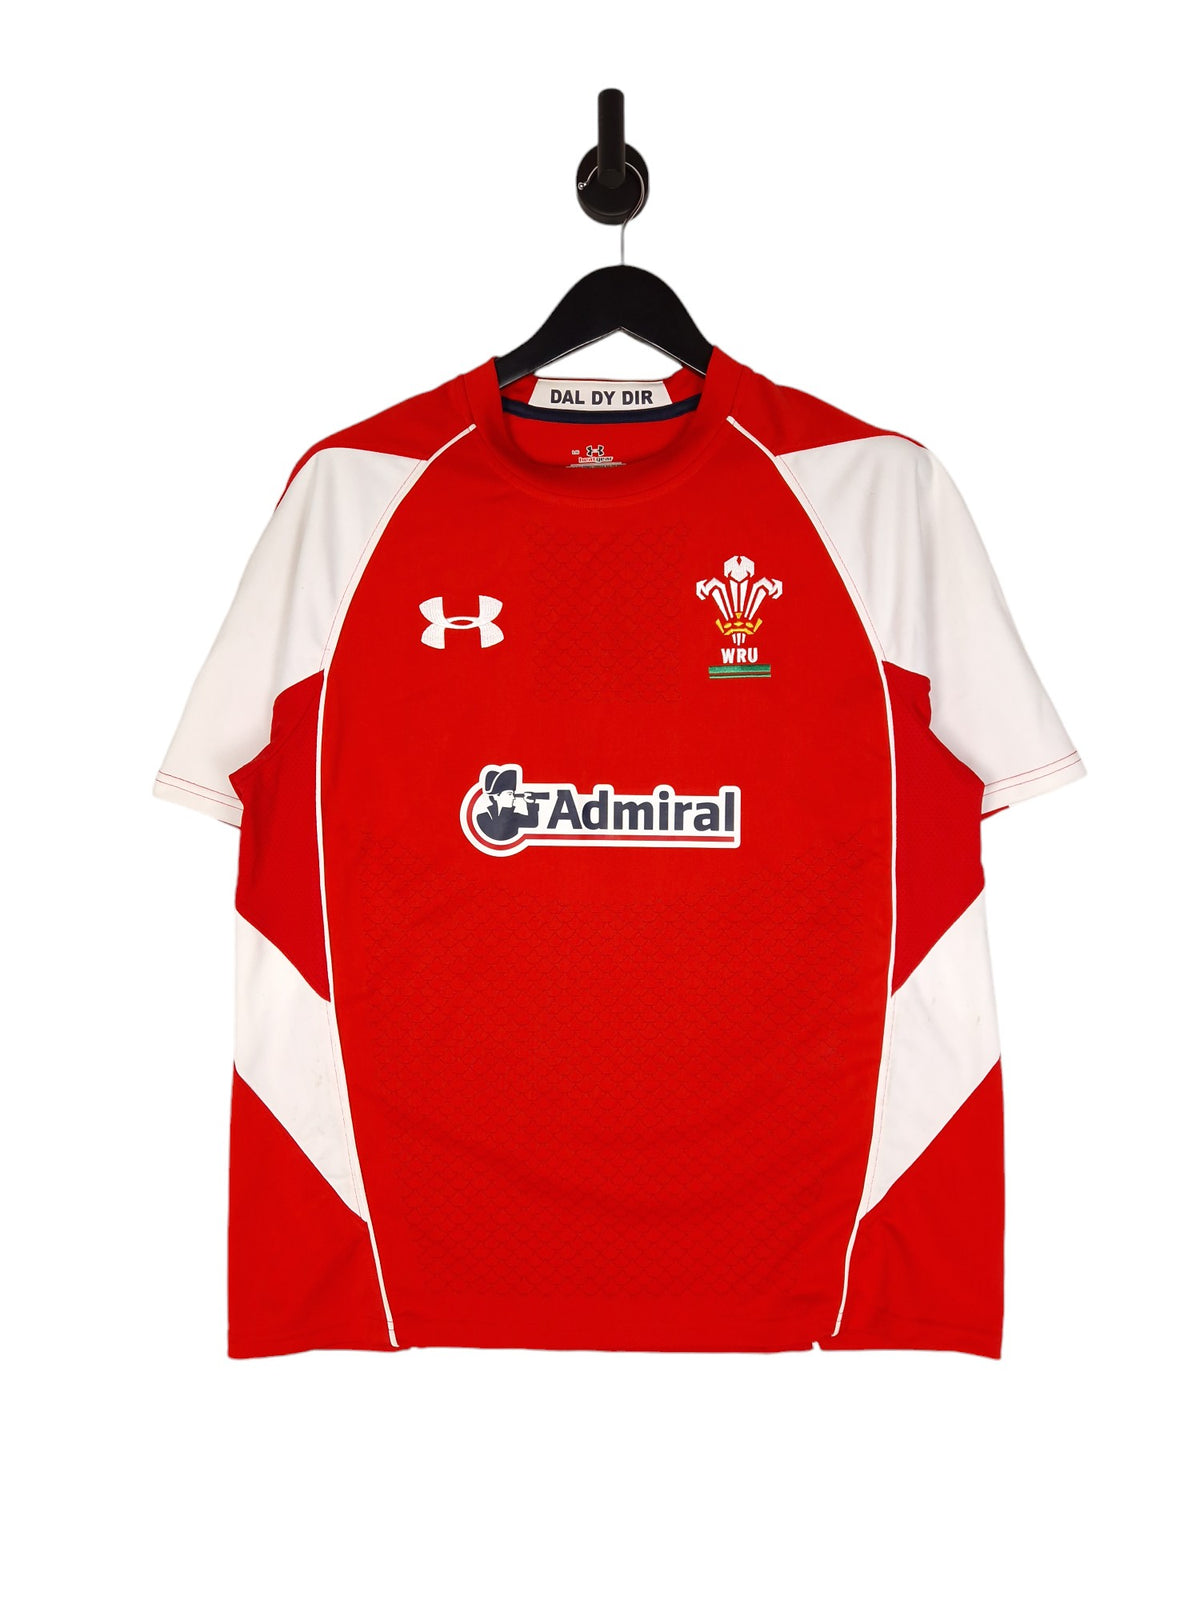 Under Armour WALES 2008/09 Rugby Union Jersey - Size Small